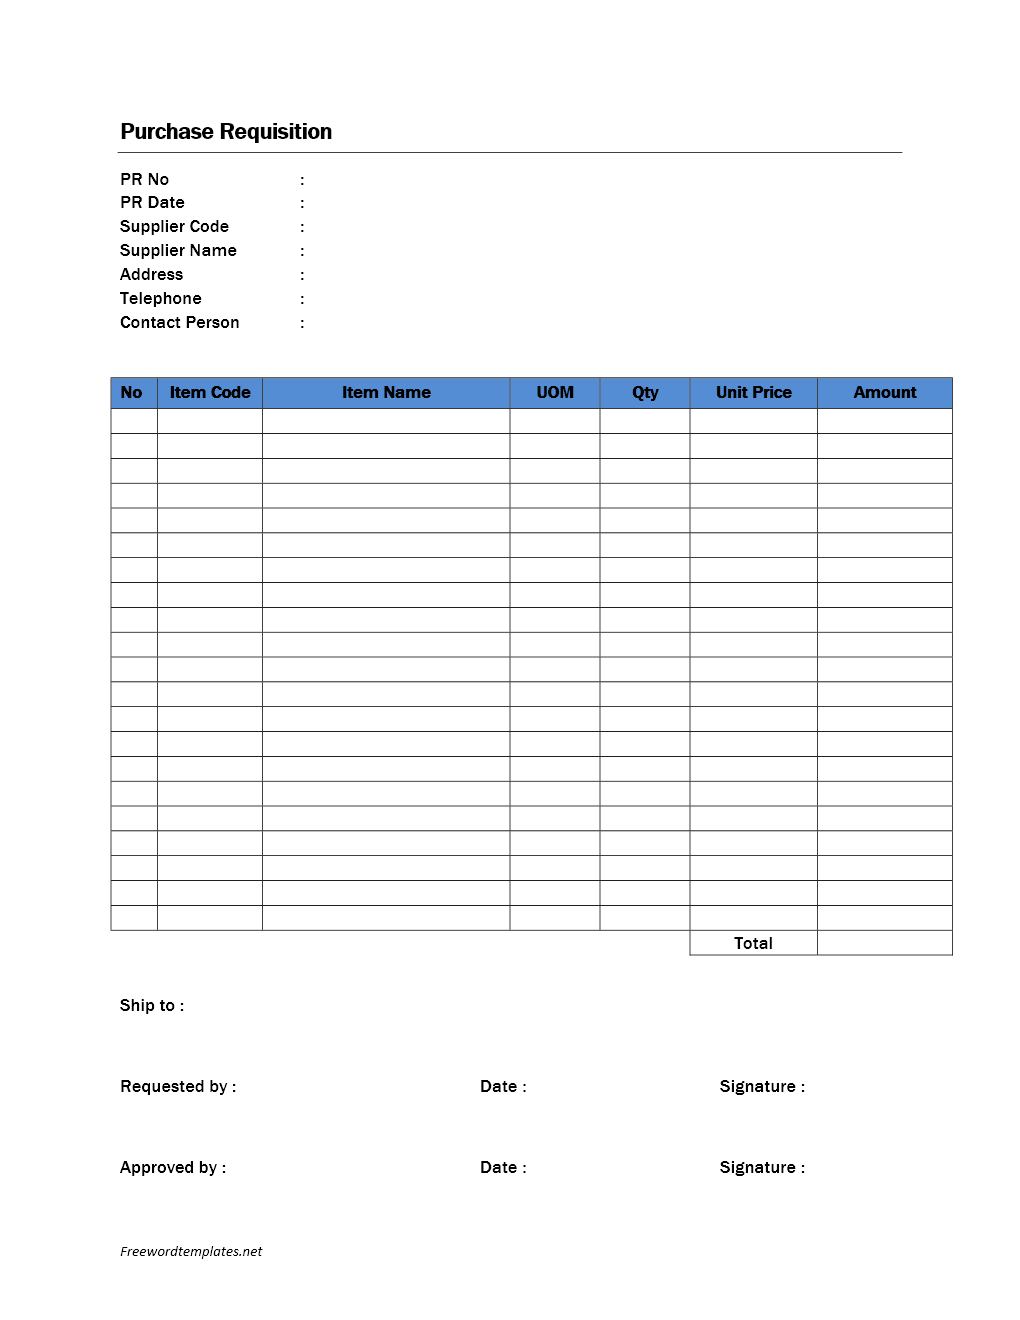 Purchase Requisition Form | Freewordtemplates.net